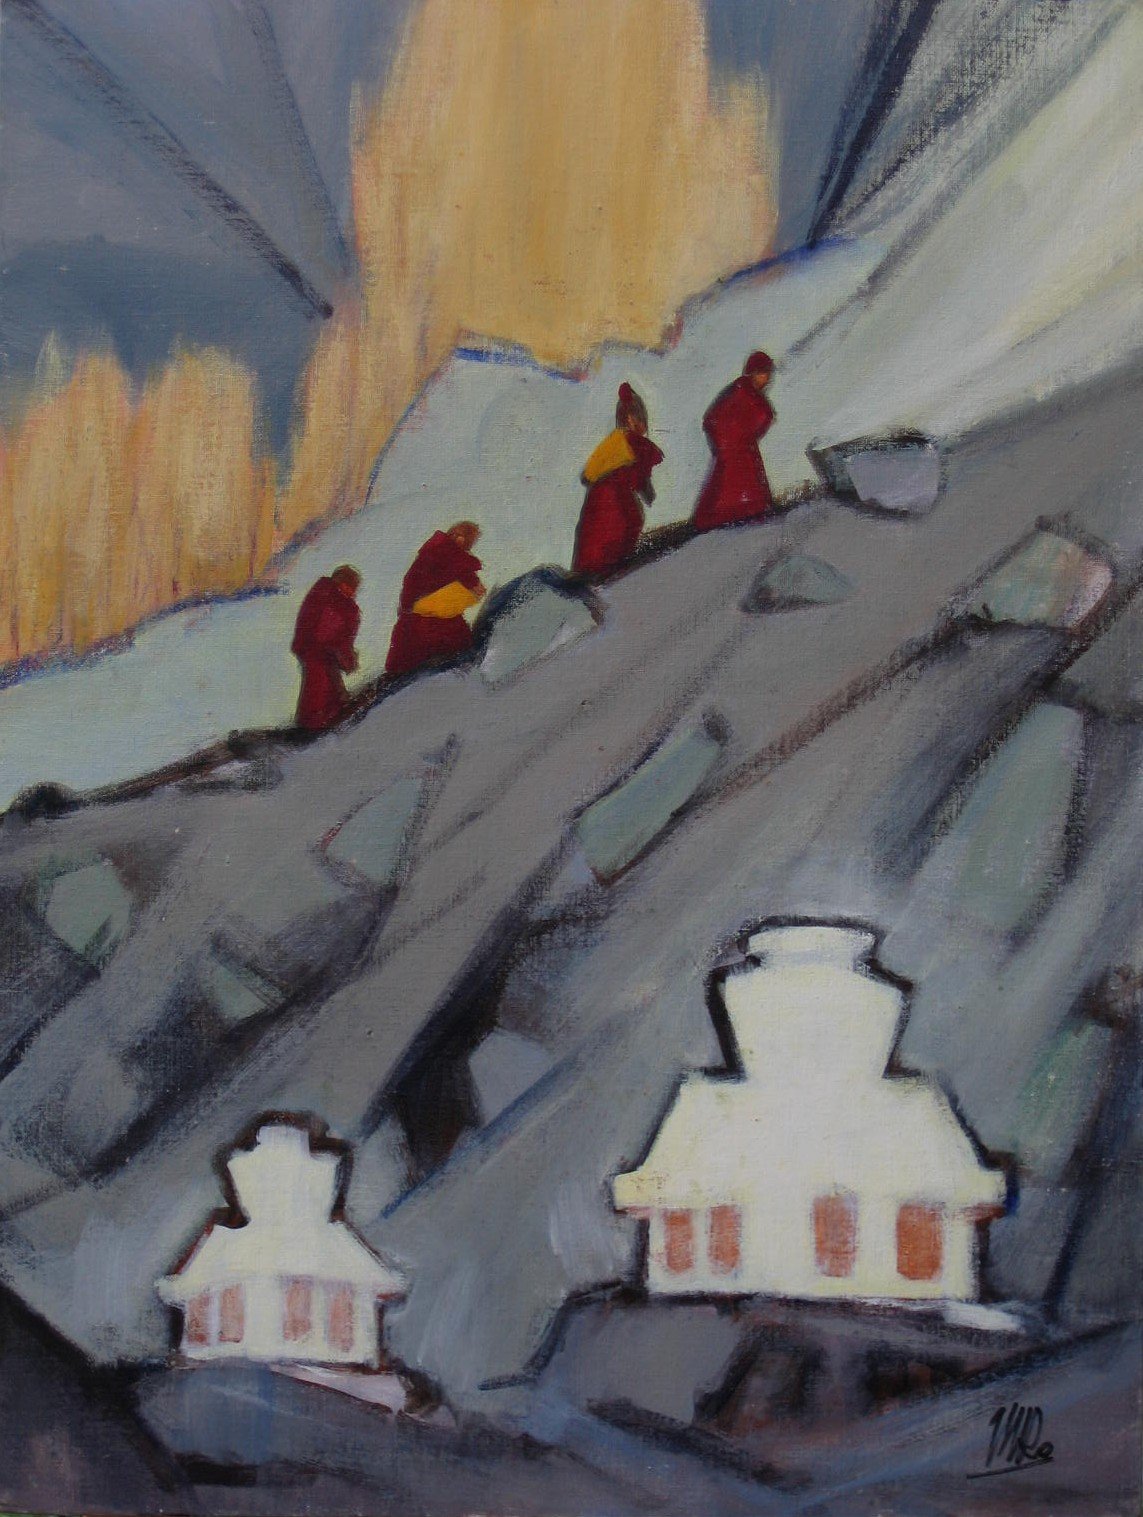 Up to the Monastery • Nubra Valley